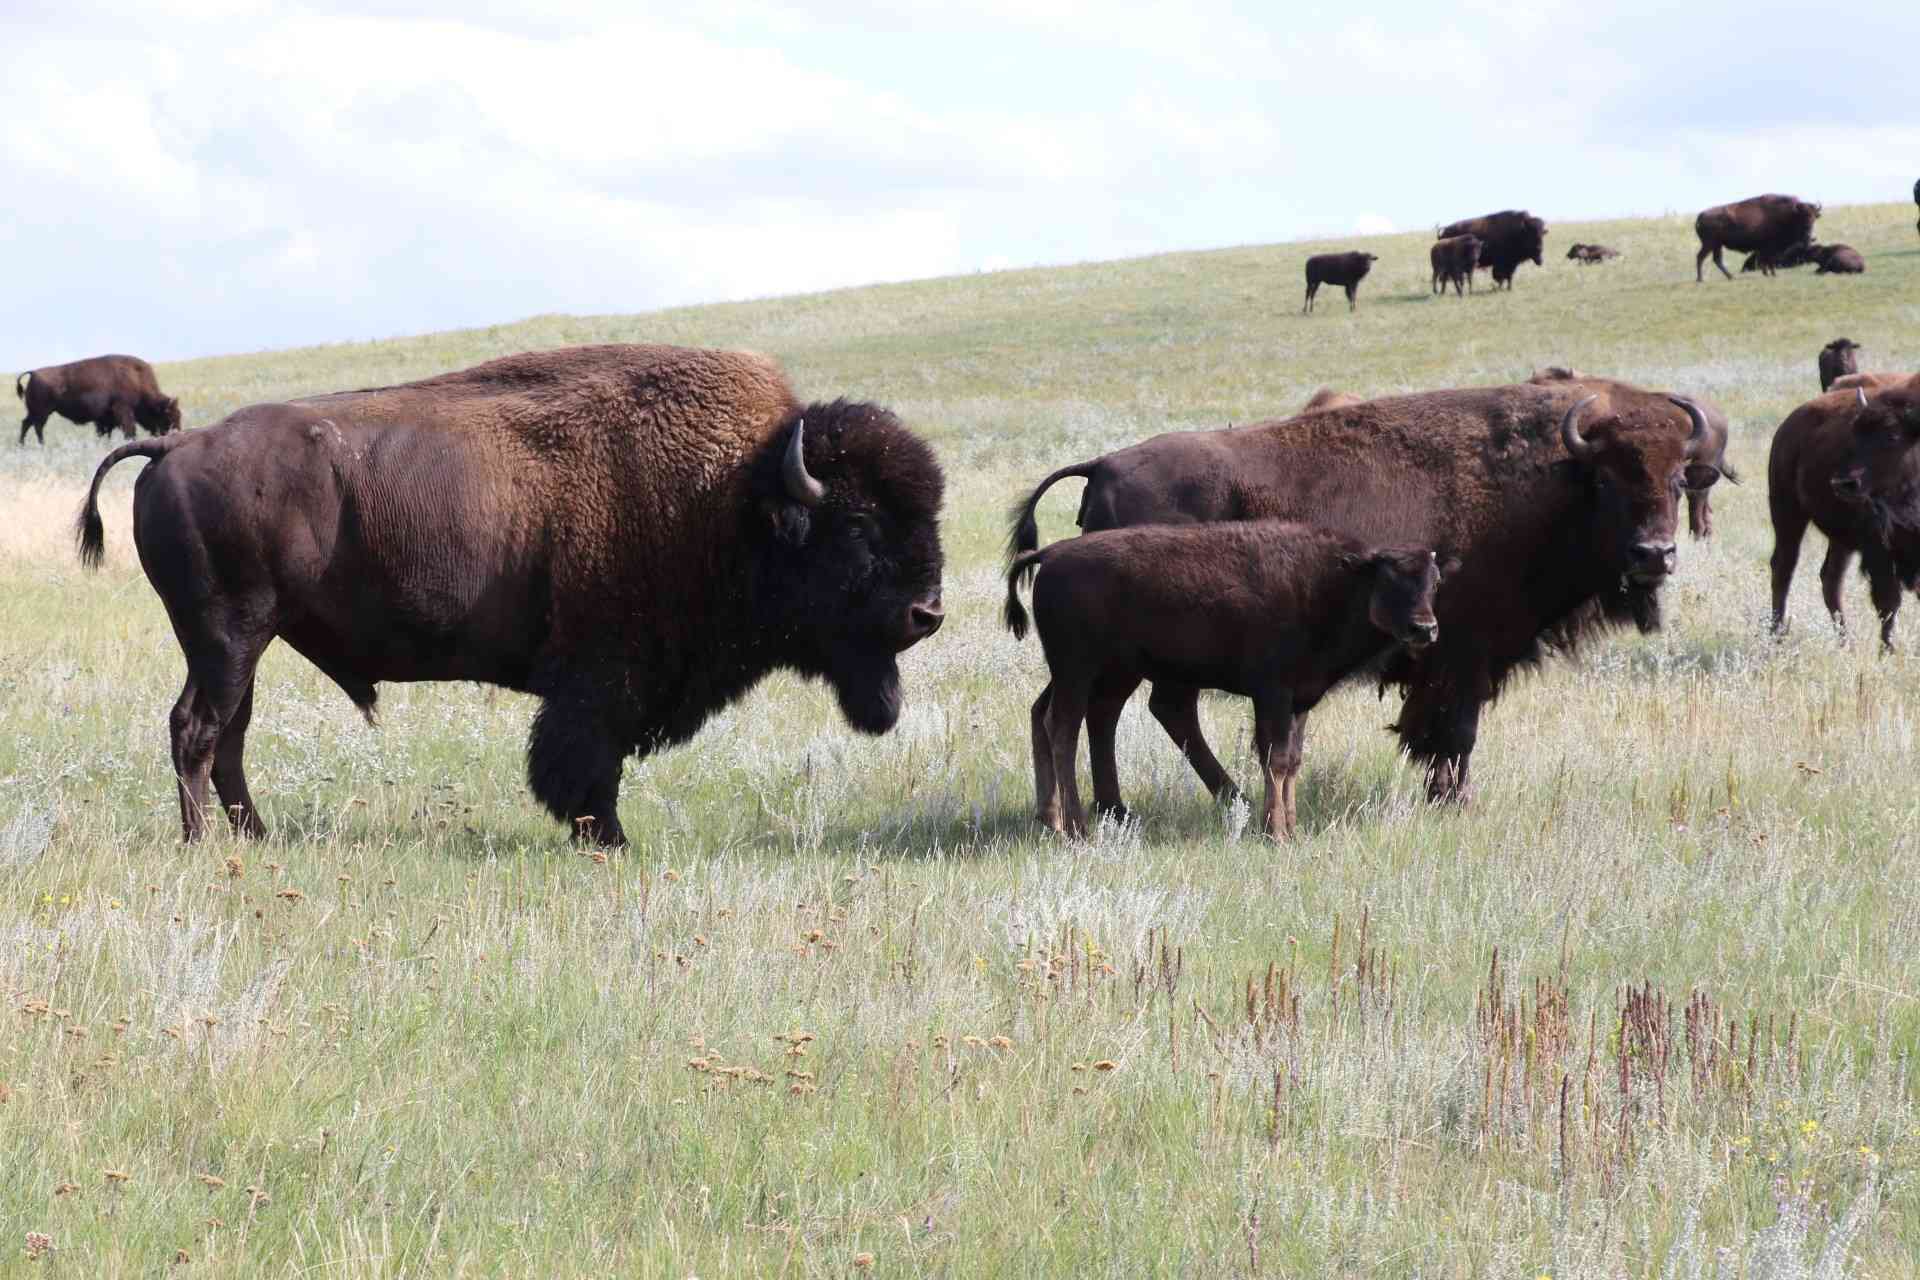 Buffalo slaughter left lasting impact on Indigenous peoples